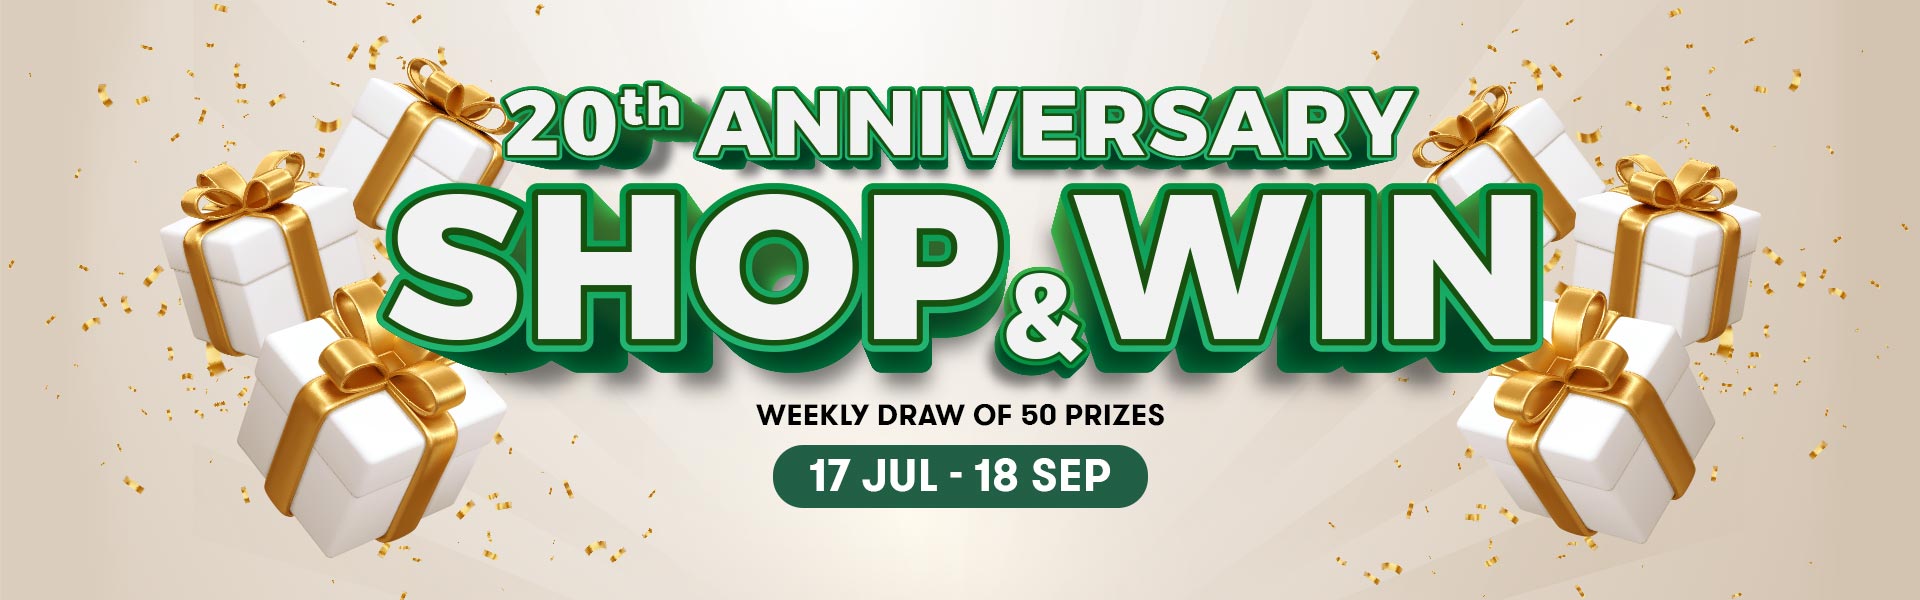 20th Anniversary Shop & Win Lucky Draw